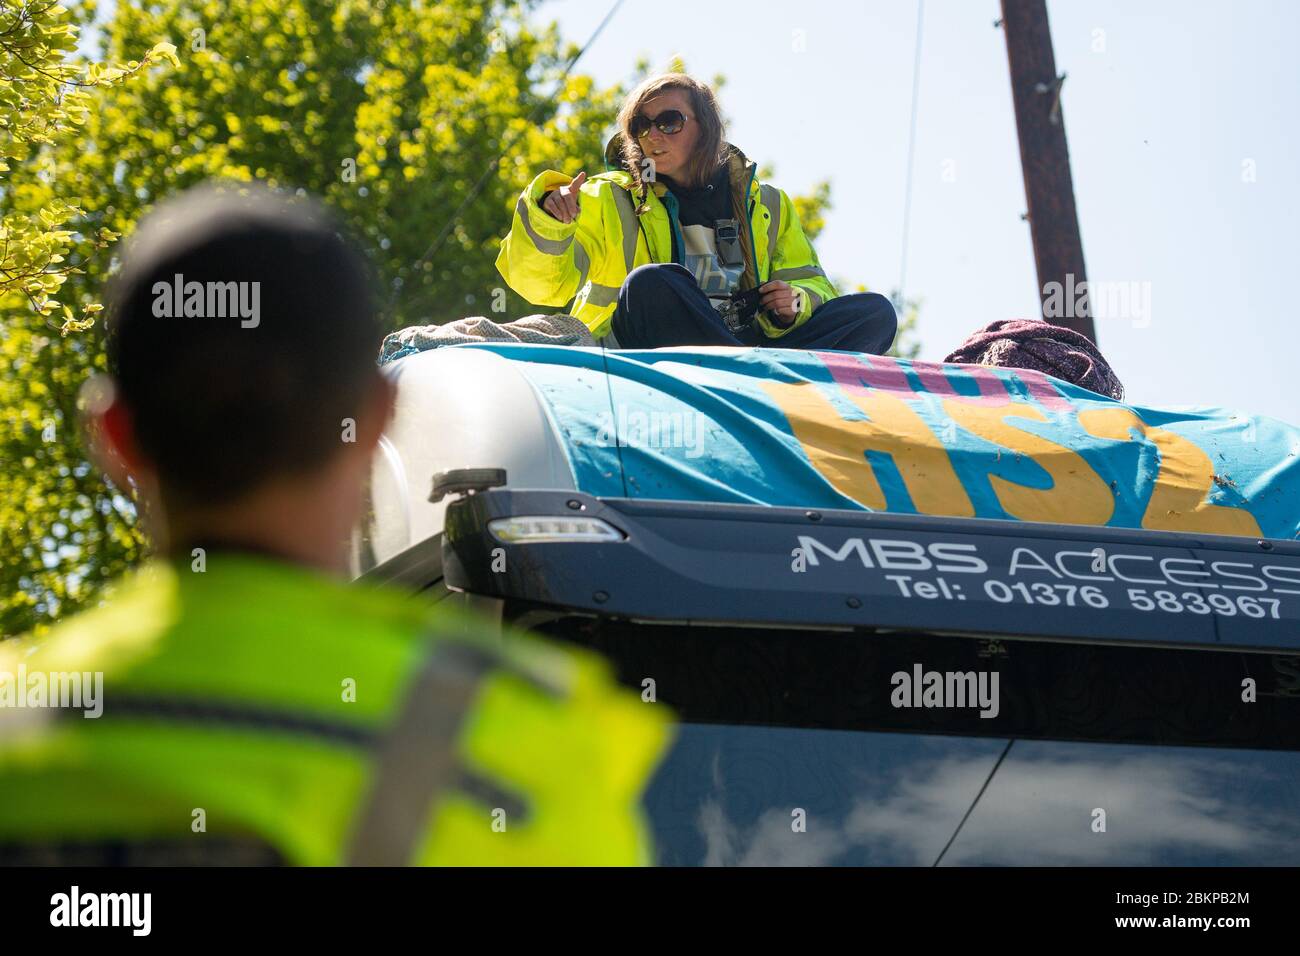 Police negotiate with an anti-HS2 campaigner who has positioned themselves on an articulated lorry, believed to be involved in the construction project, in Crackley Woods, near Kenilworth, Warwickshire. A group of protesters have set up a makeshift camp in the ancient woodland, which they claim is under threat from the construction of HS2. Stock Photo